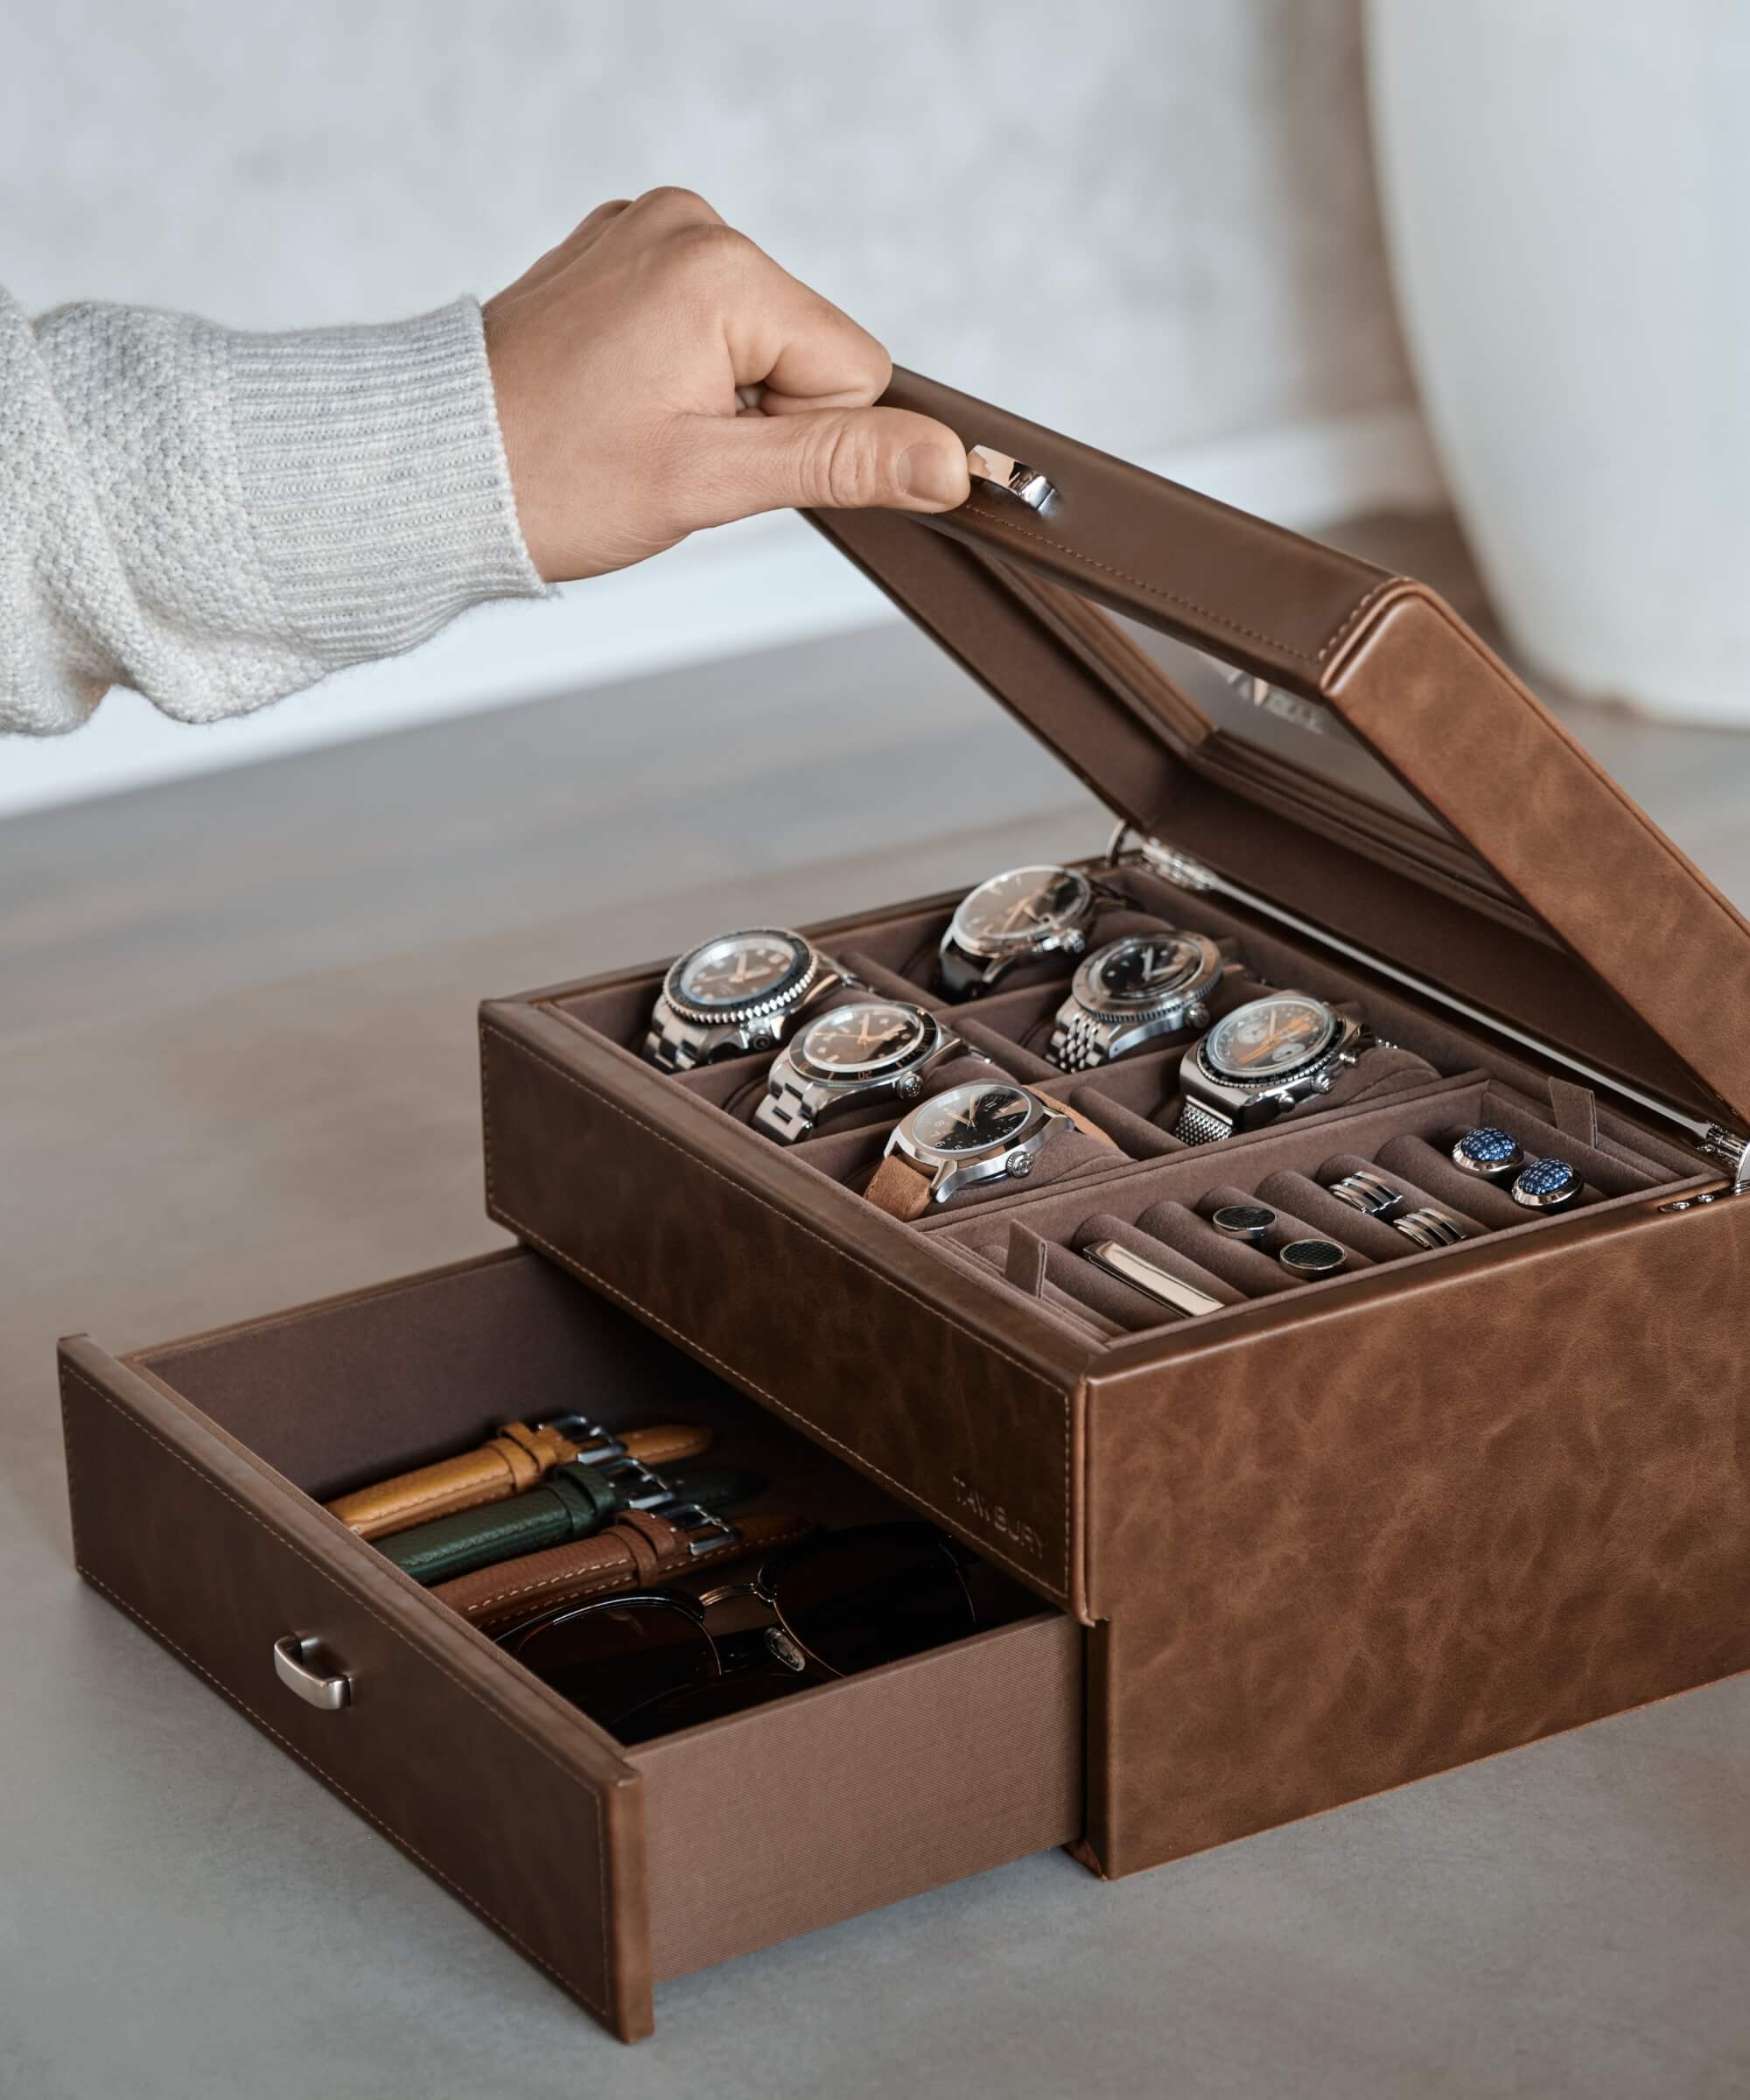 A watch enthusiast holding a TAWBURY Bayswater 6 Watch Jewellery Box - Brown made with vegan leather, containing watches.